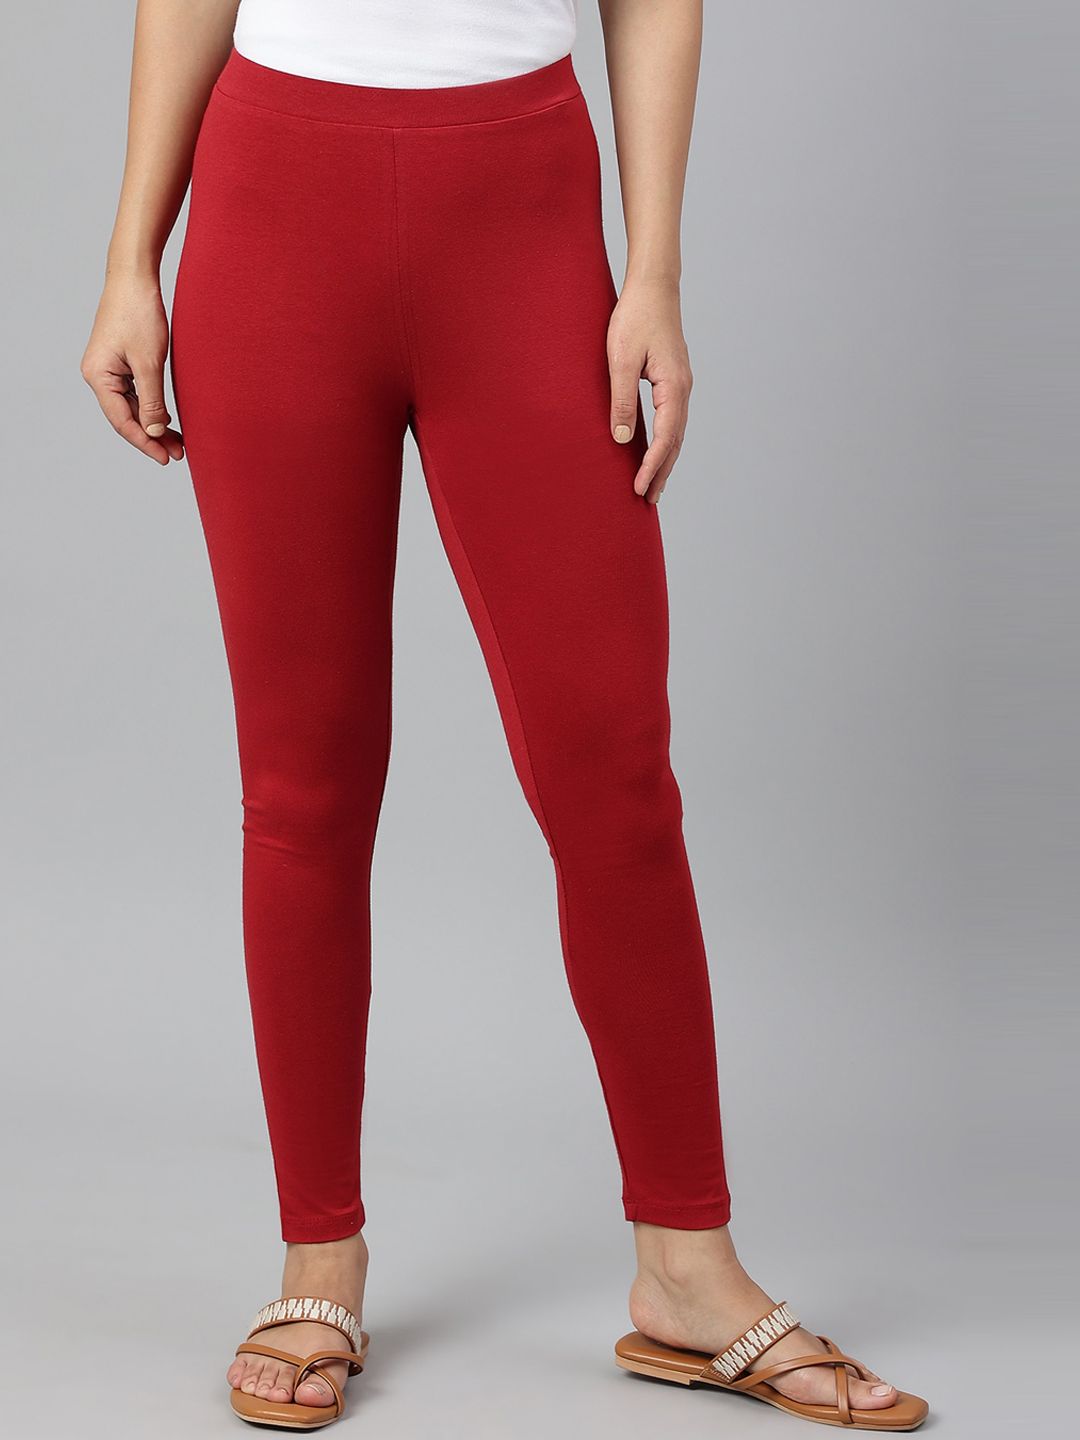 W Women Red Solid Ankle-Length Leggings Price in India